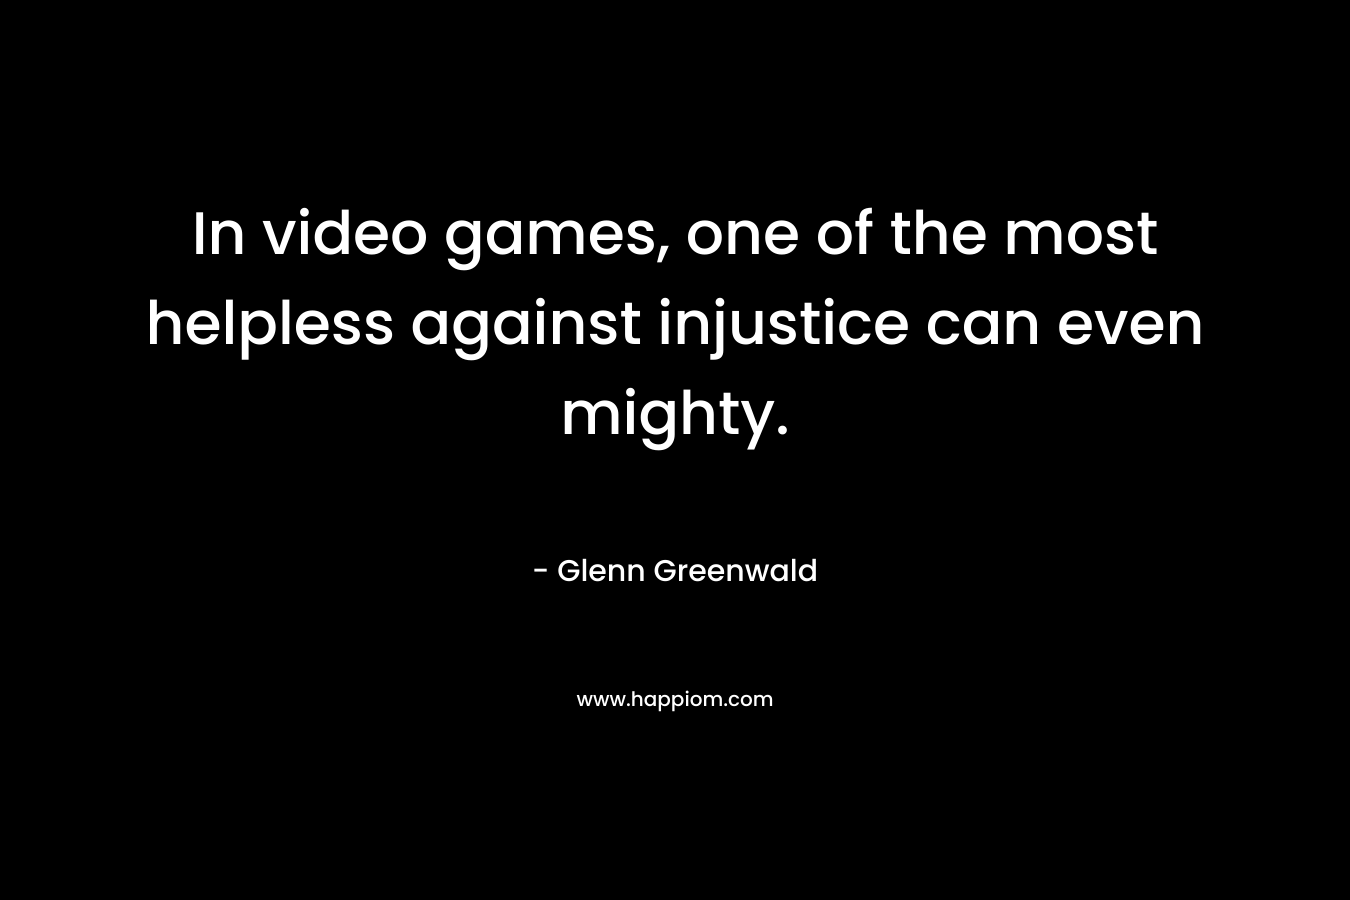 In video games, one of the most helpless against injustice can even mighty.